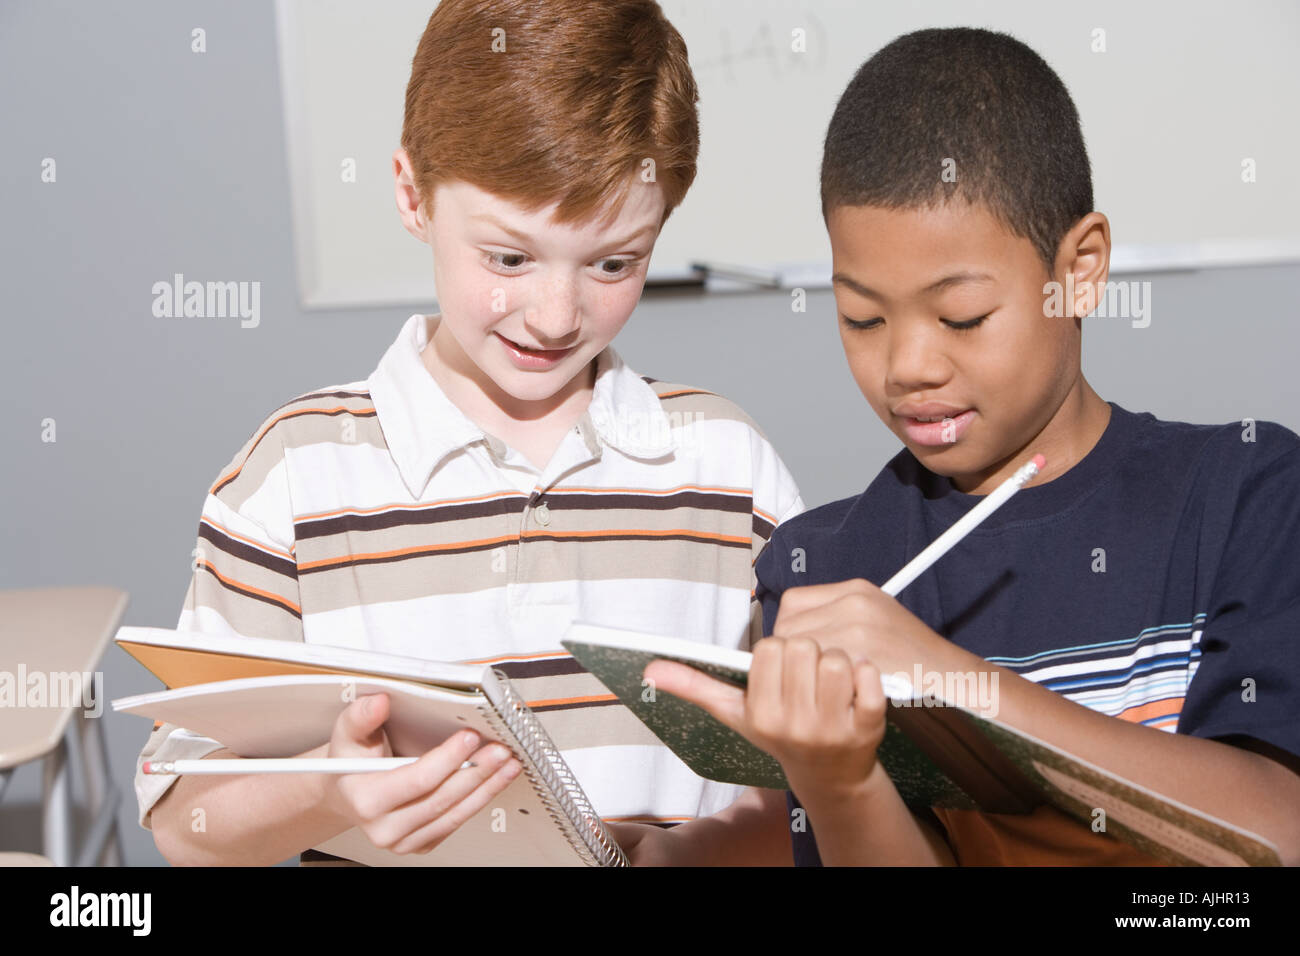 Boys writing in notebooks Stock Photo